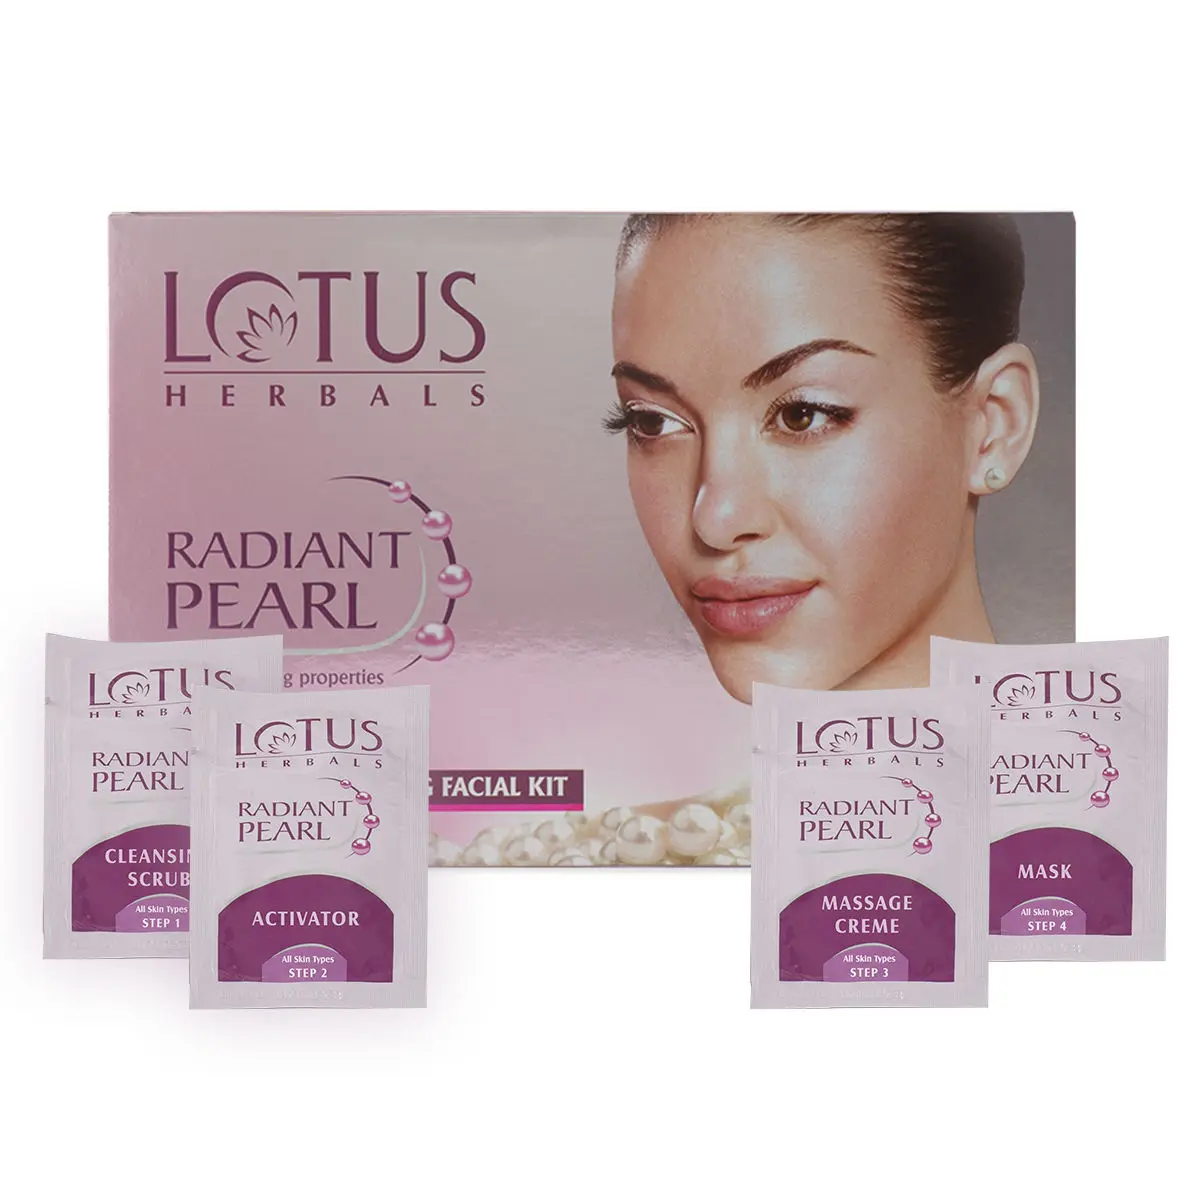 Lotus Herbals Radiant Pearl Cellular 1 Facial Kit | For Deep Cleaning | With Pearl Extracts & Green Tea | 37g